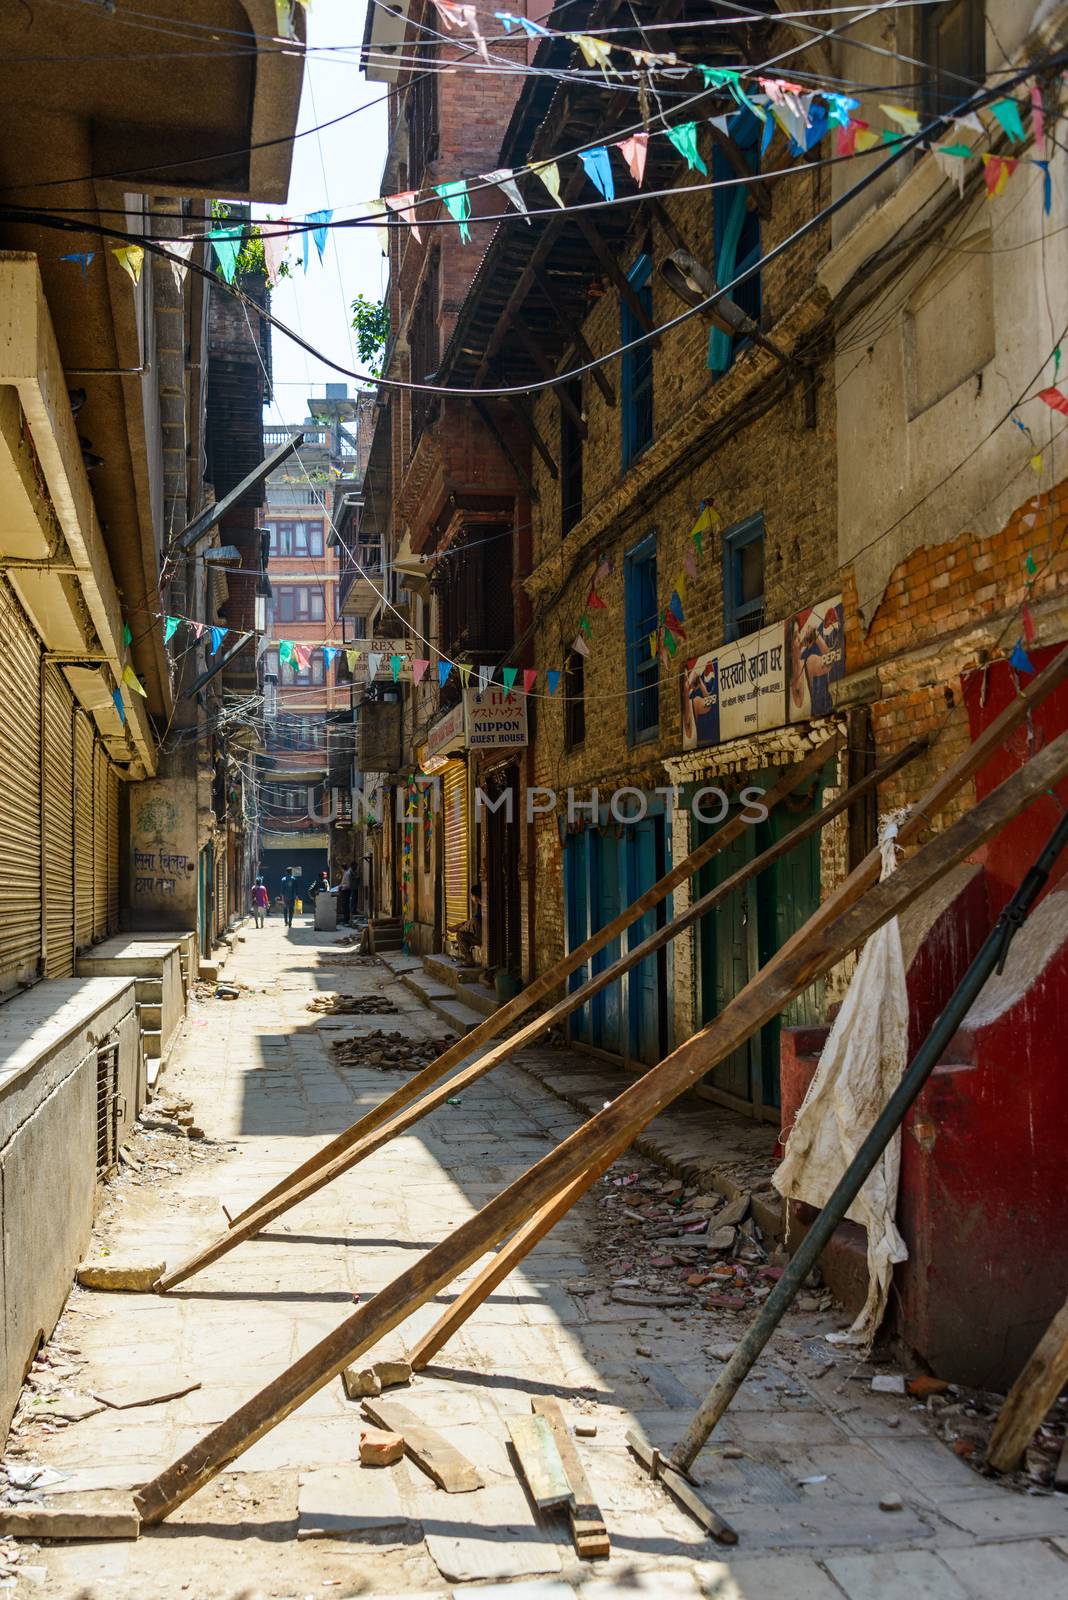 KATHMANDU, NEPAL - MAY 14, 2015: A small alley off Freak Street where wood beams support damaged buildings after two major earthquakes hit Nepal in the past weeks.